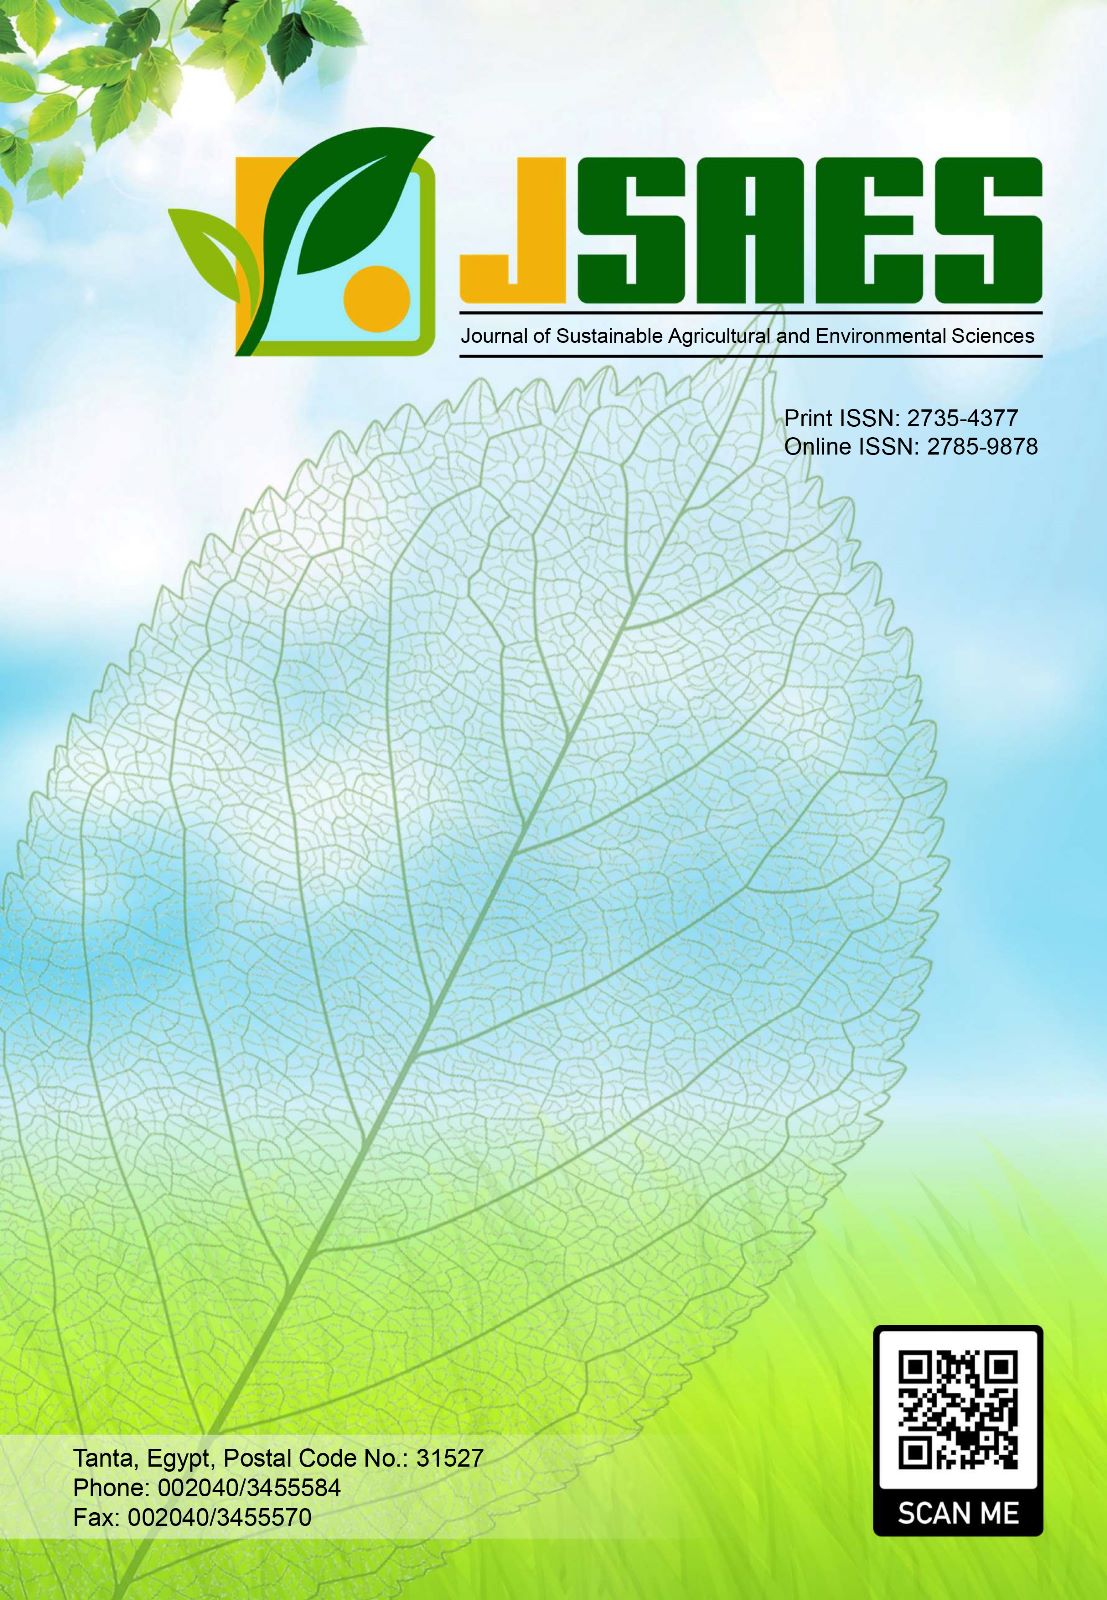 Journal of Sustainable Agricultural and Environmental Sciences